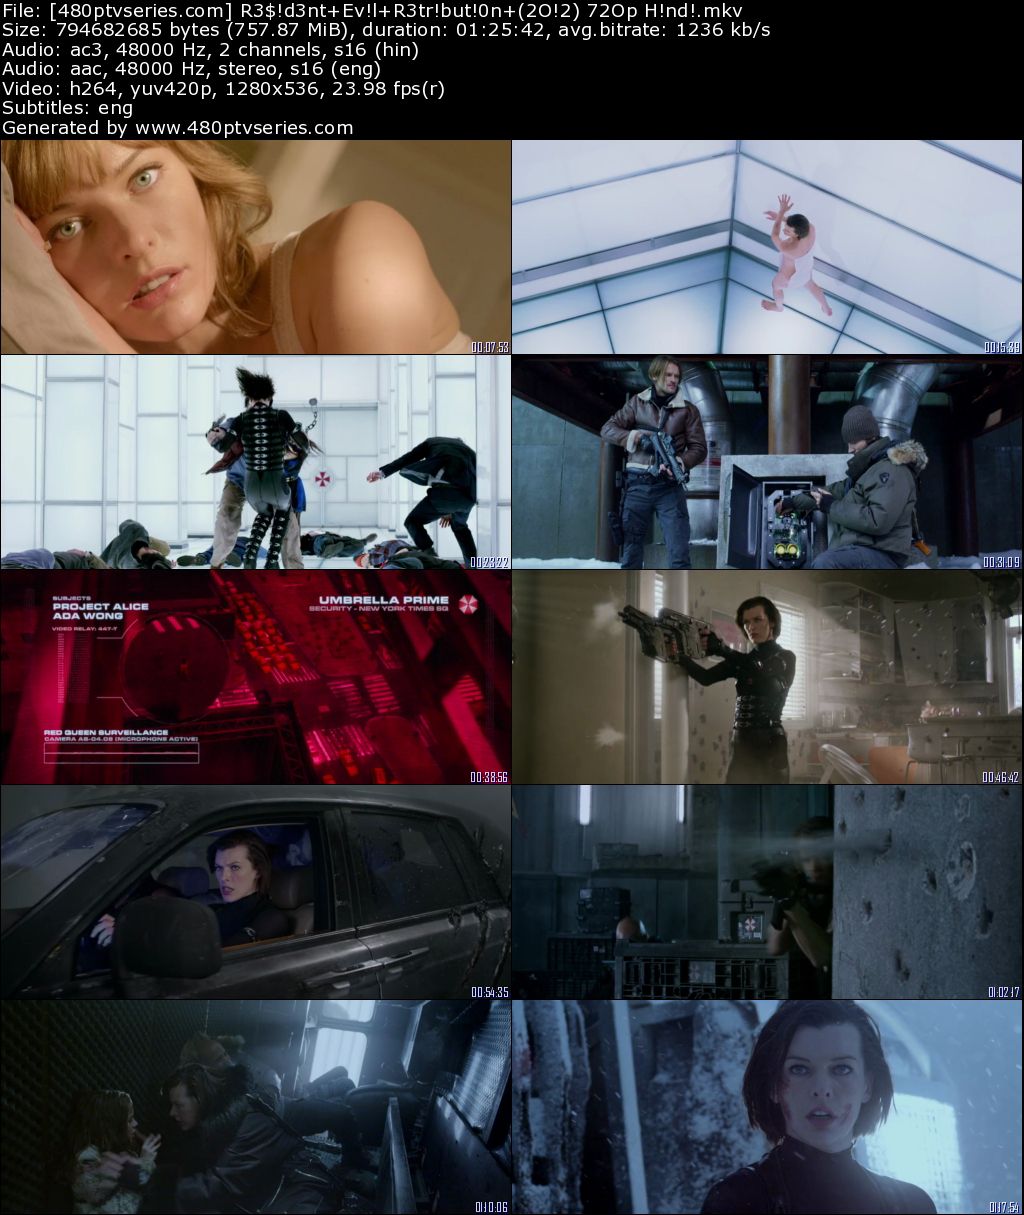 Download Resident Evil Retribution (2012) 750MB Full Hindi Dual Audio Movie Download 720p Bluray Free Watch Online Full Movie Download Worldfree4u 9xmovies